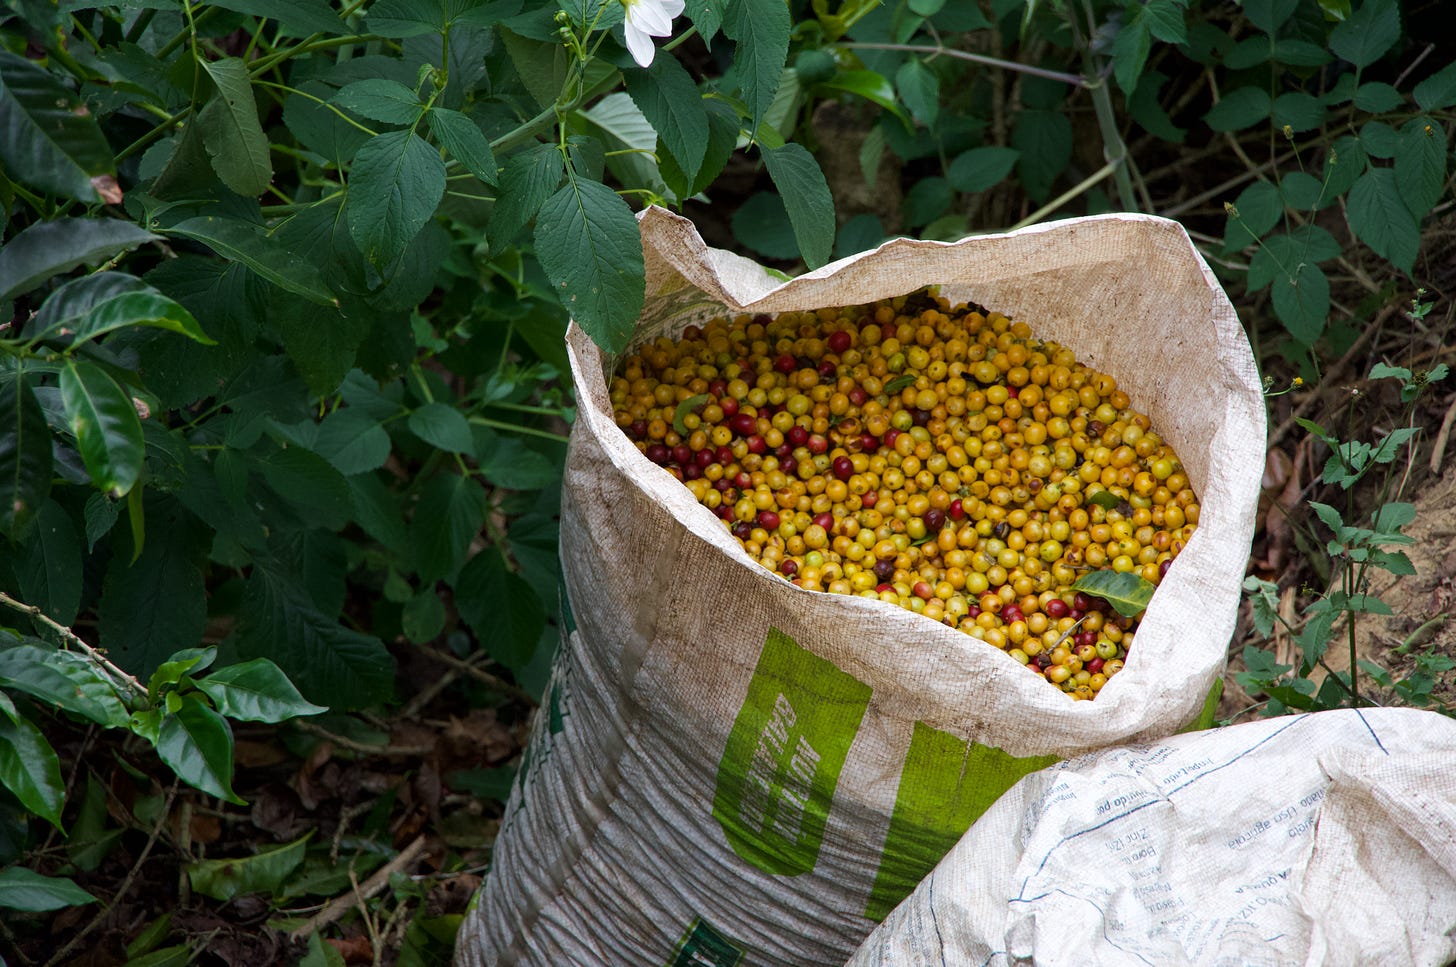 Yellow and red coffee cherries fill a white sack nearly to the brim. The sack is on the ground in front of a green viny bush with white flowers.